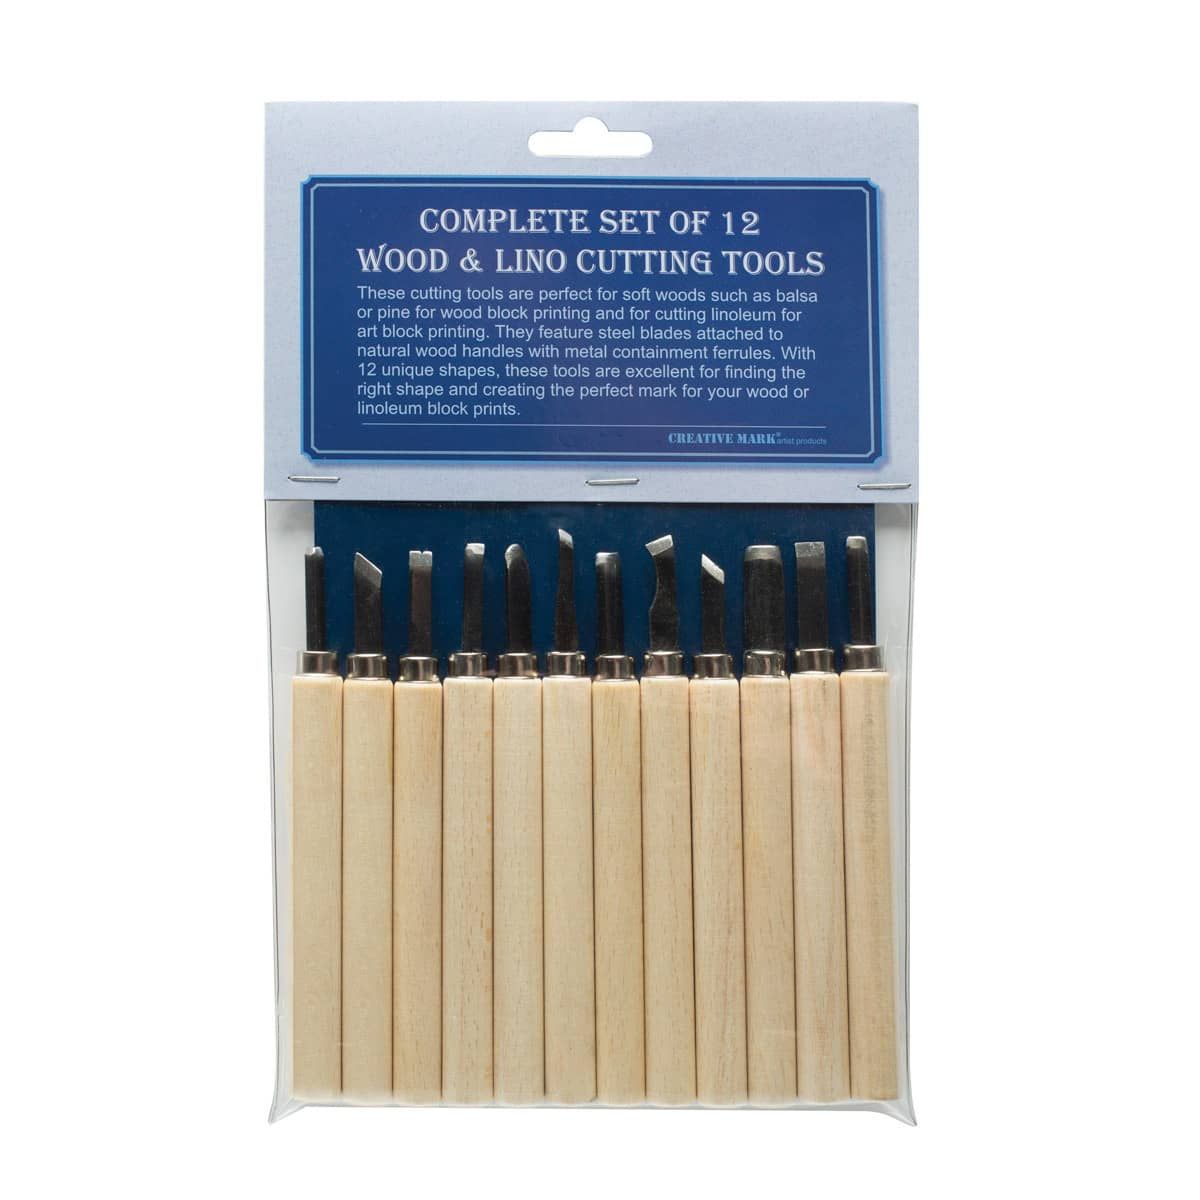 Wood and Lino Cutting Tool Set of 12	